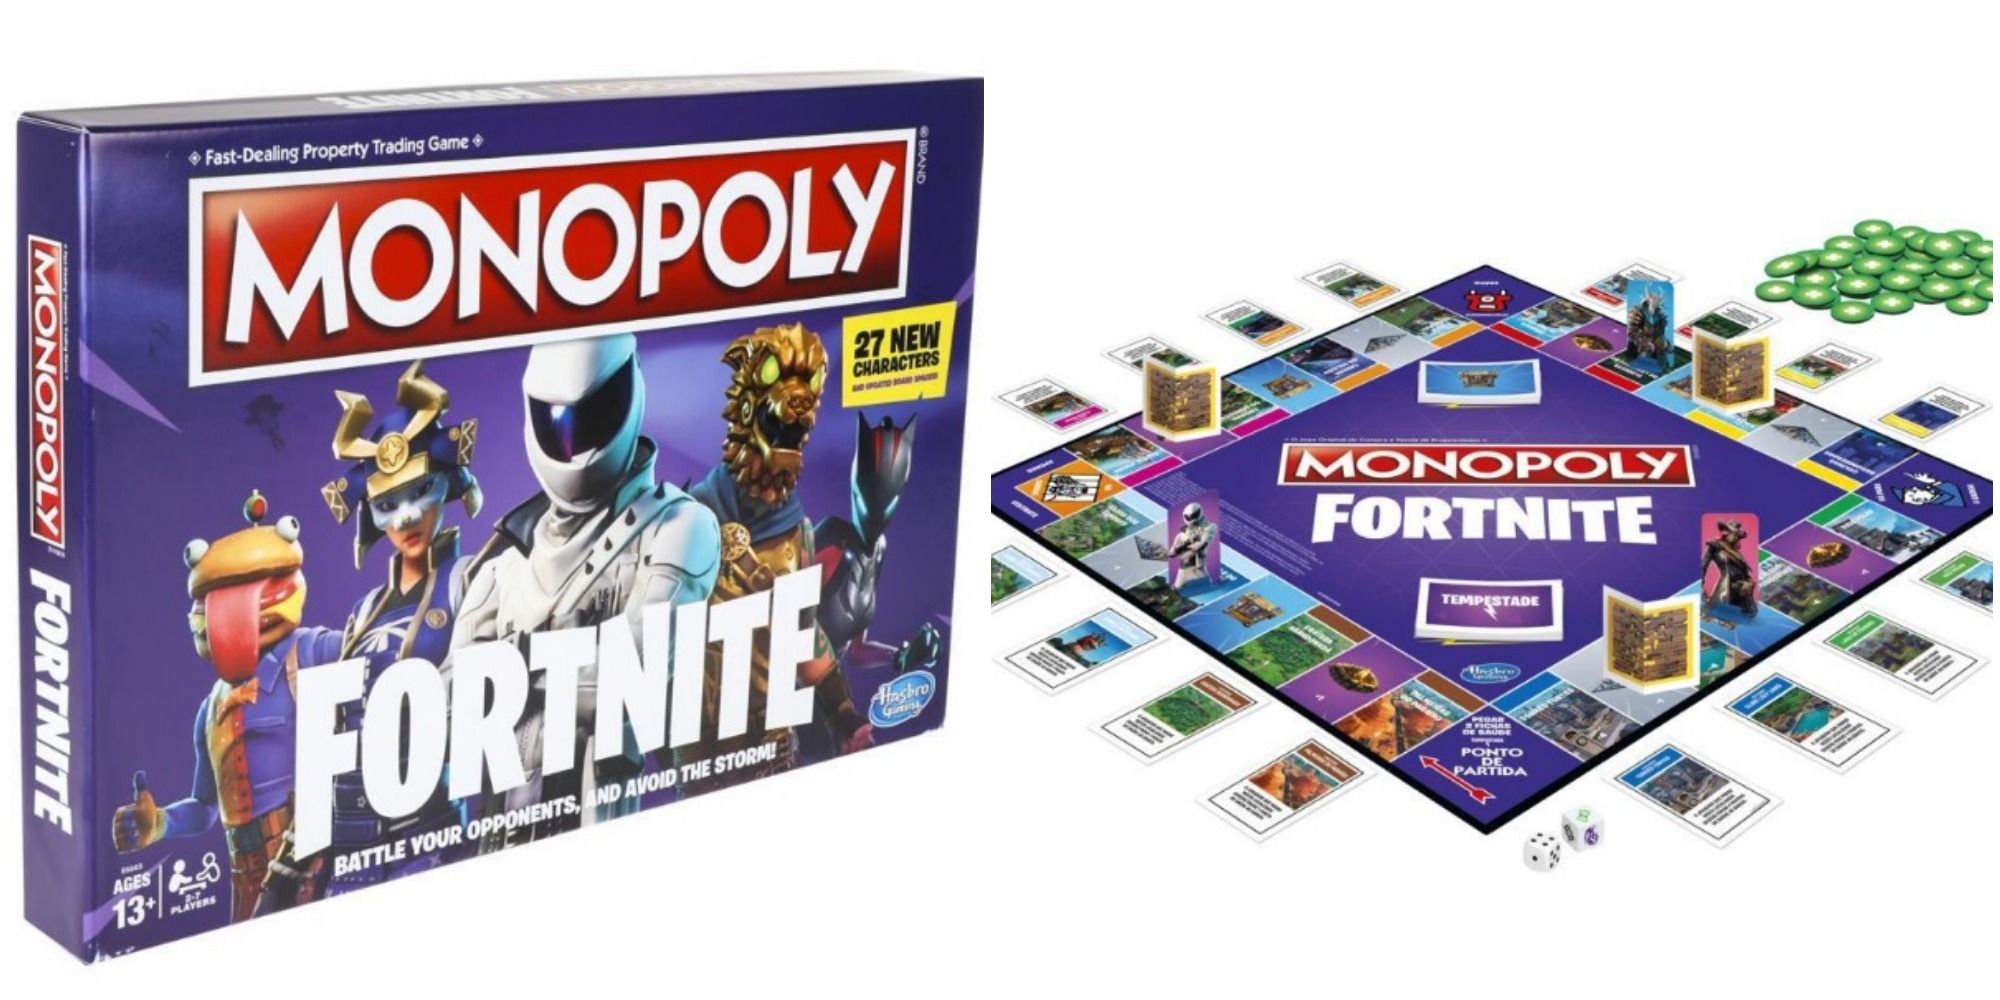 monopoly fortnite edition holiday gift ideas